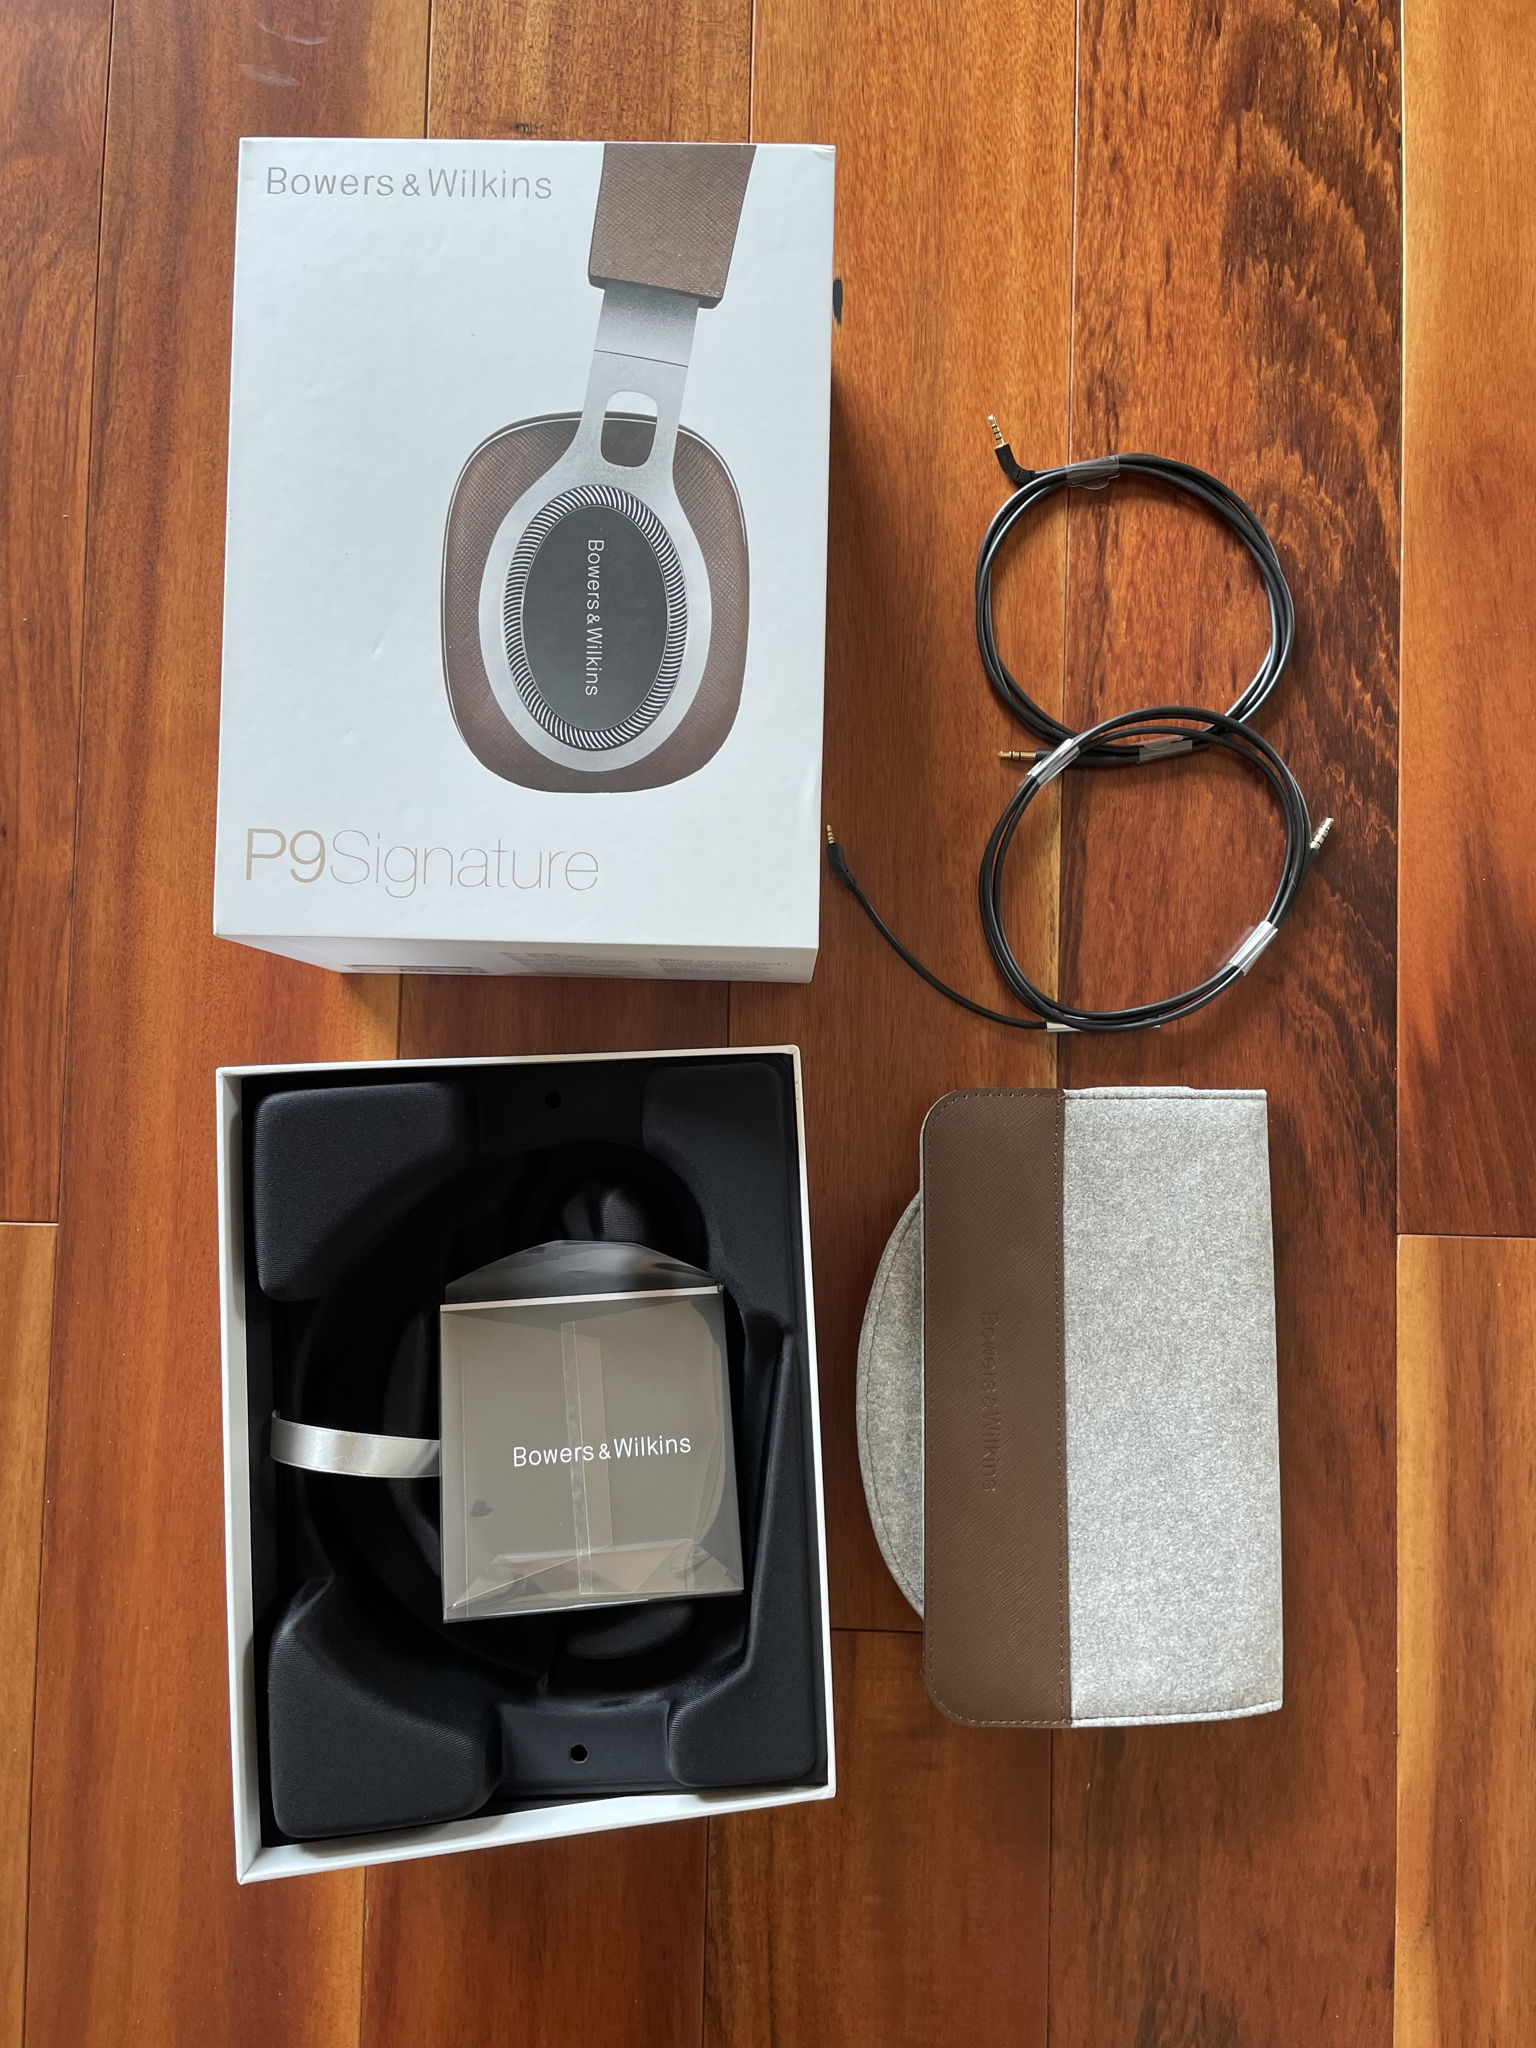 B&W (Bowers & Wilkins) P9 Signature Reference Headphones 2